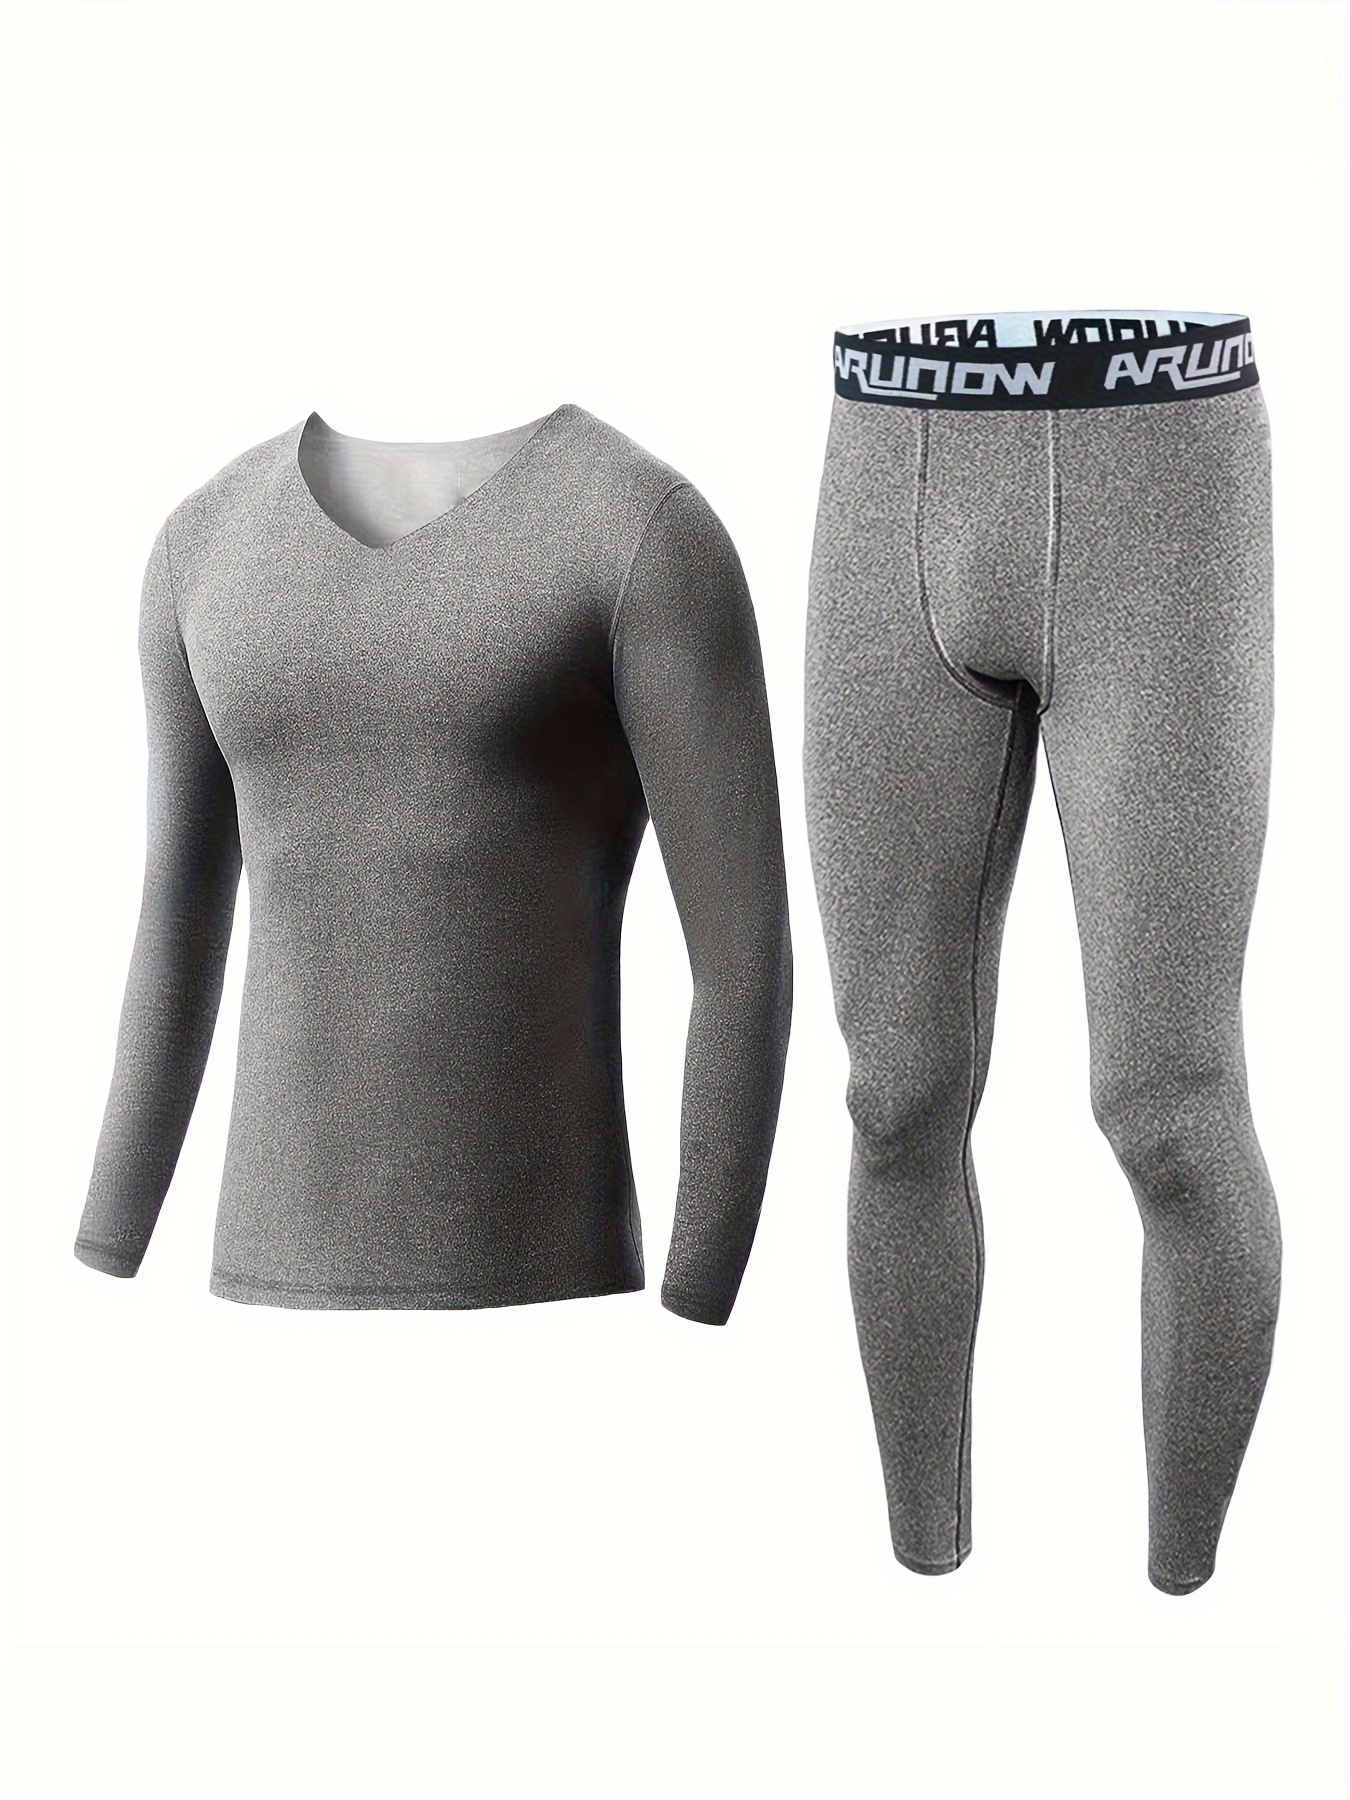  COOLOMG Thermal Compression Set Boys Girls Youth Base Layer  Shirt + Leggings Cold Gear for Basketball Football Running Ski Seamless  Dark Gray S: Clothing, Shoes & Jewelry